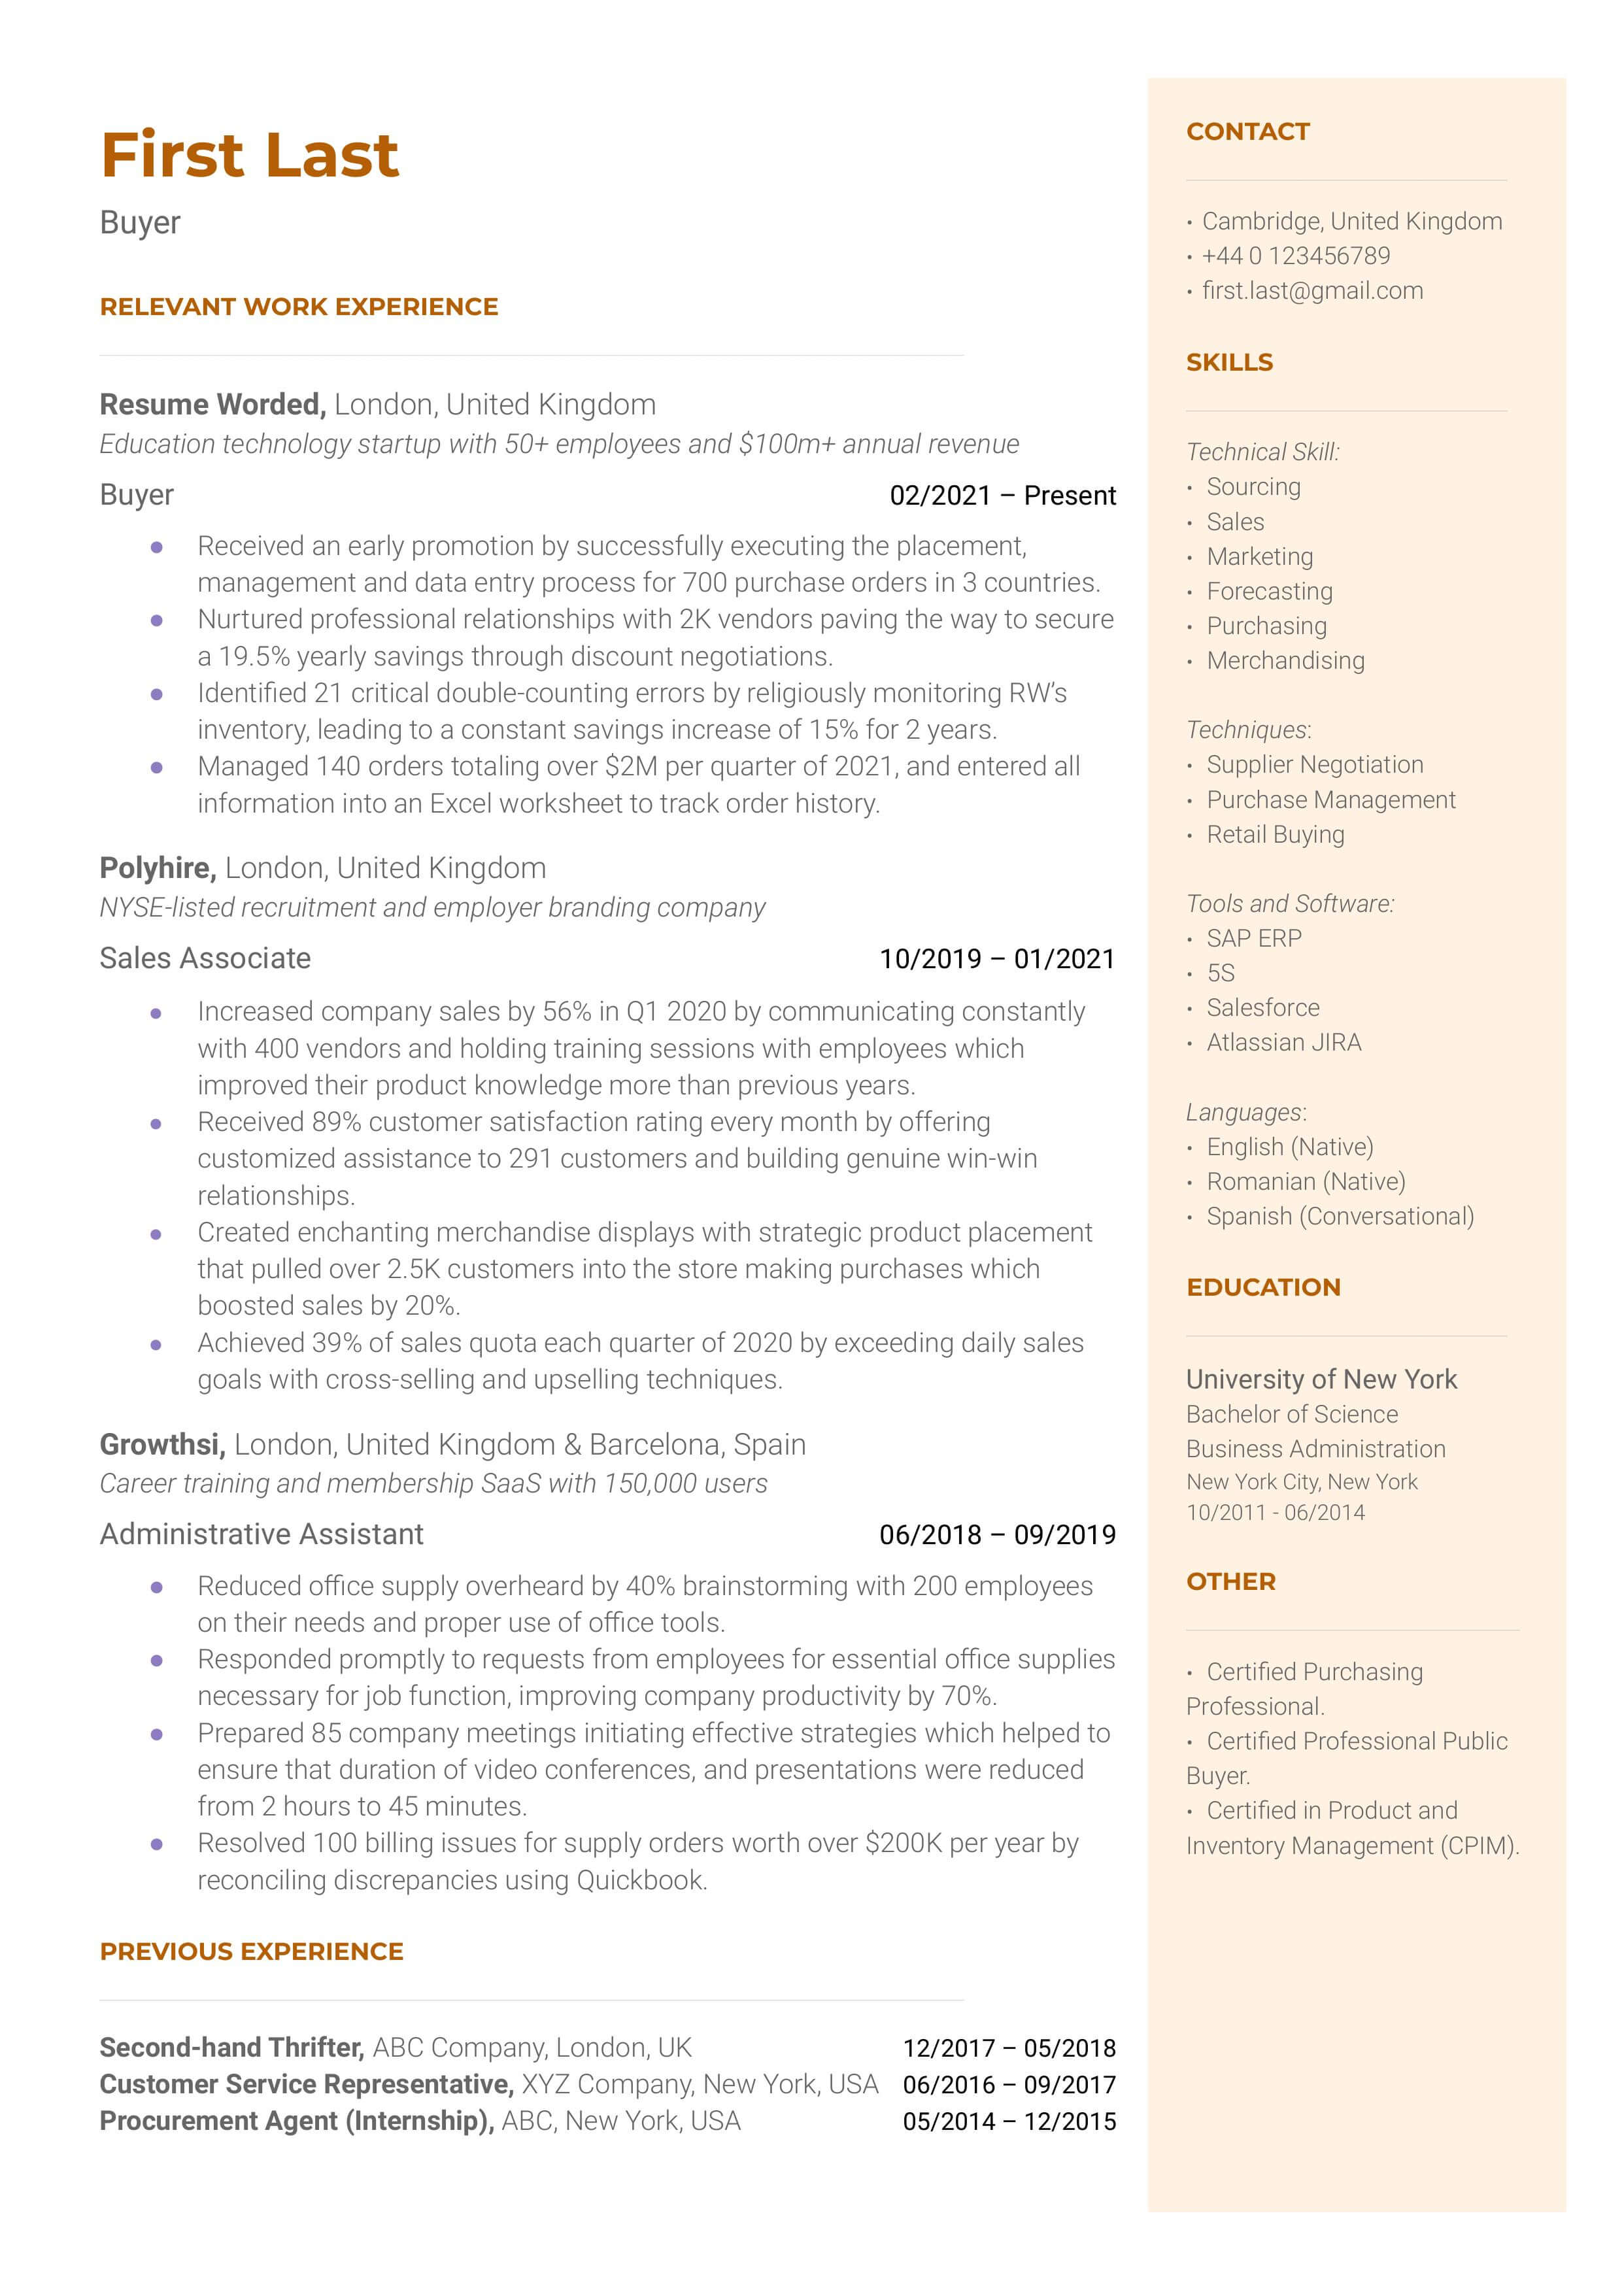 A buyer resume template that quantifies achievements with metrics